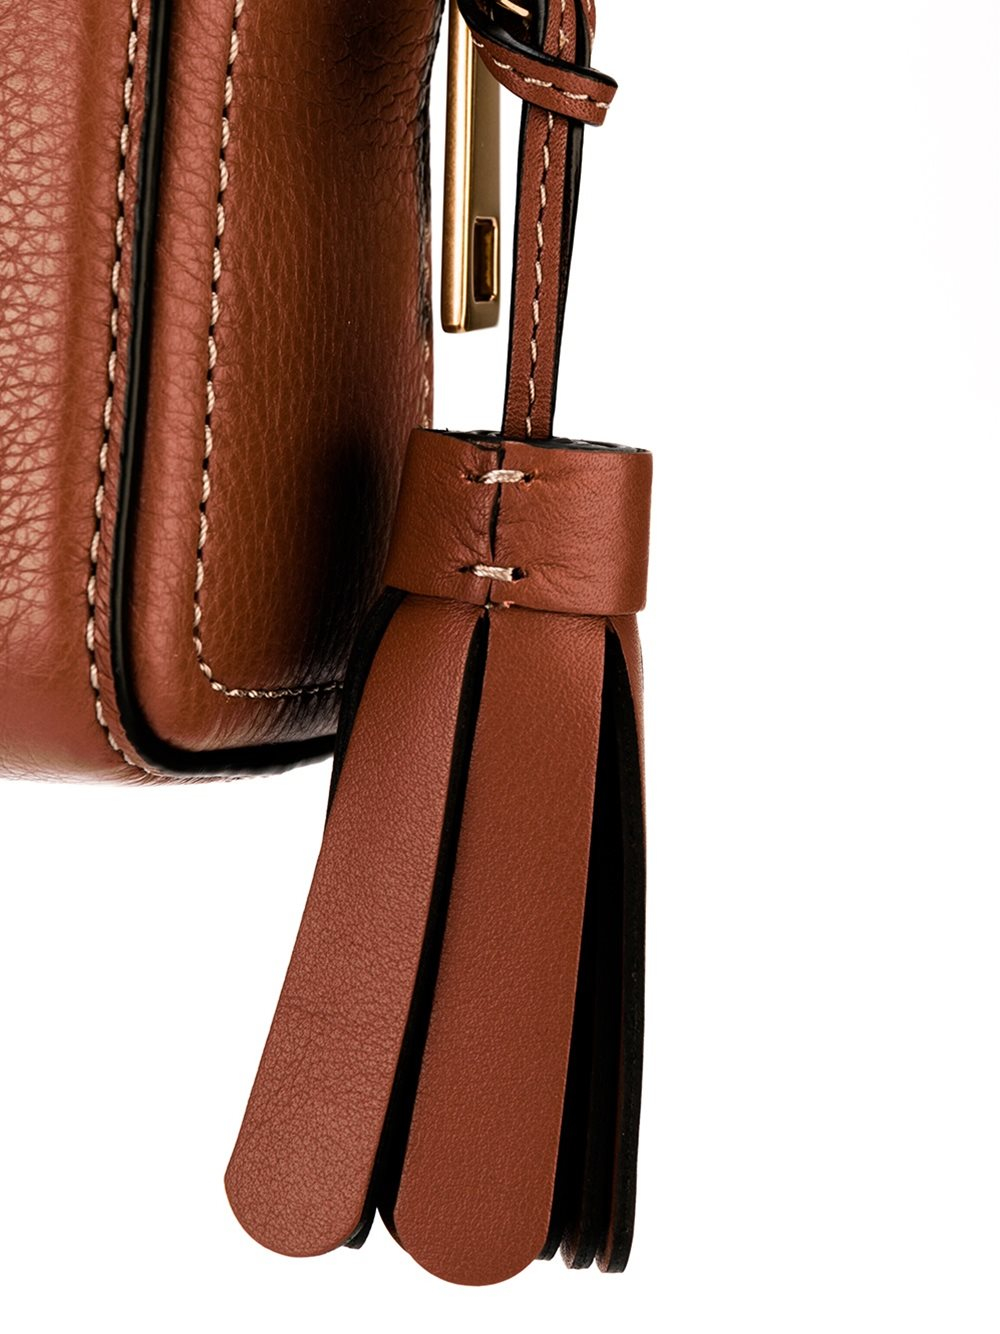 Marc Jacobs Leather Small 'shutter' Crossbody Bag in Brown - Lyst